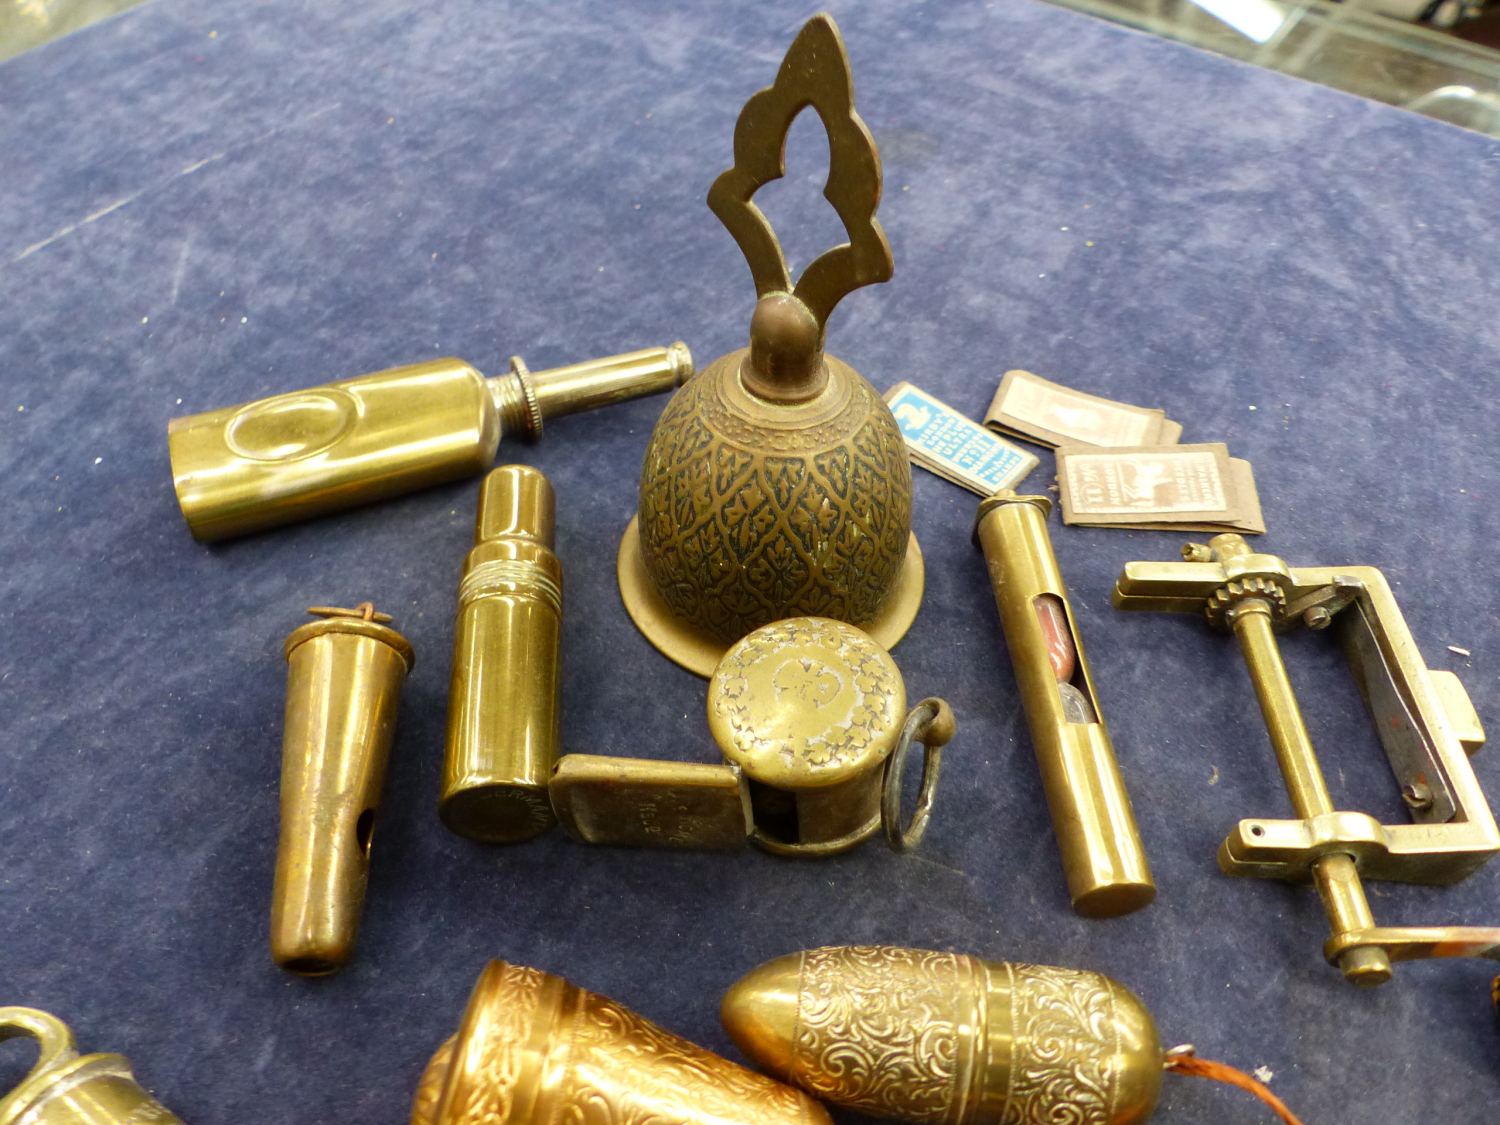 A QUANTITY OF BRASS SEWING ACCOUTREMENTS, WHISTLES, A STAMP PRESS ETC - Image 3 of 5